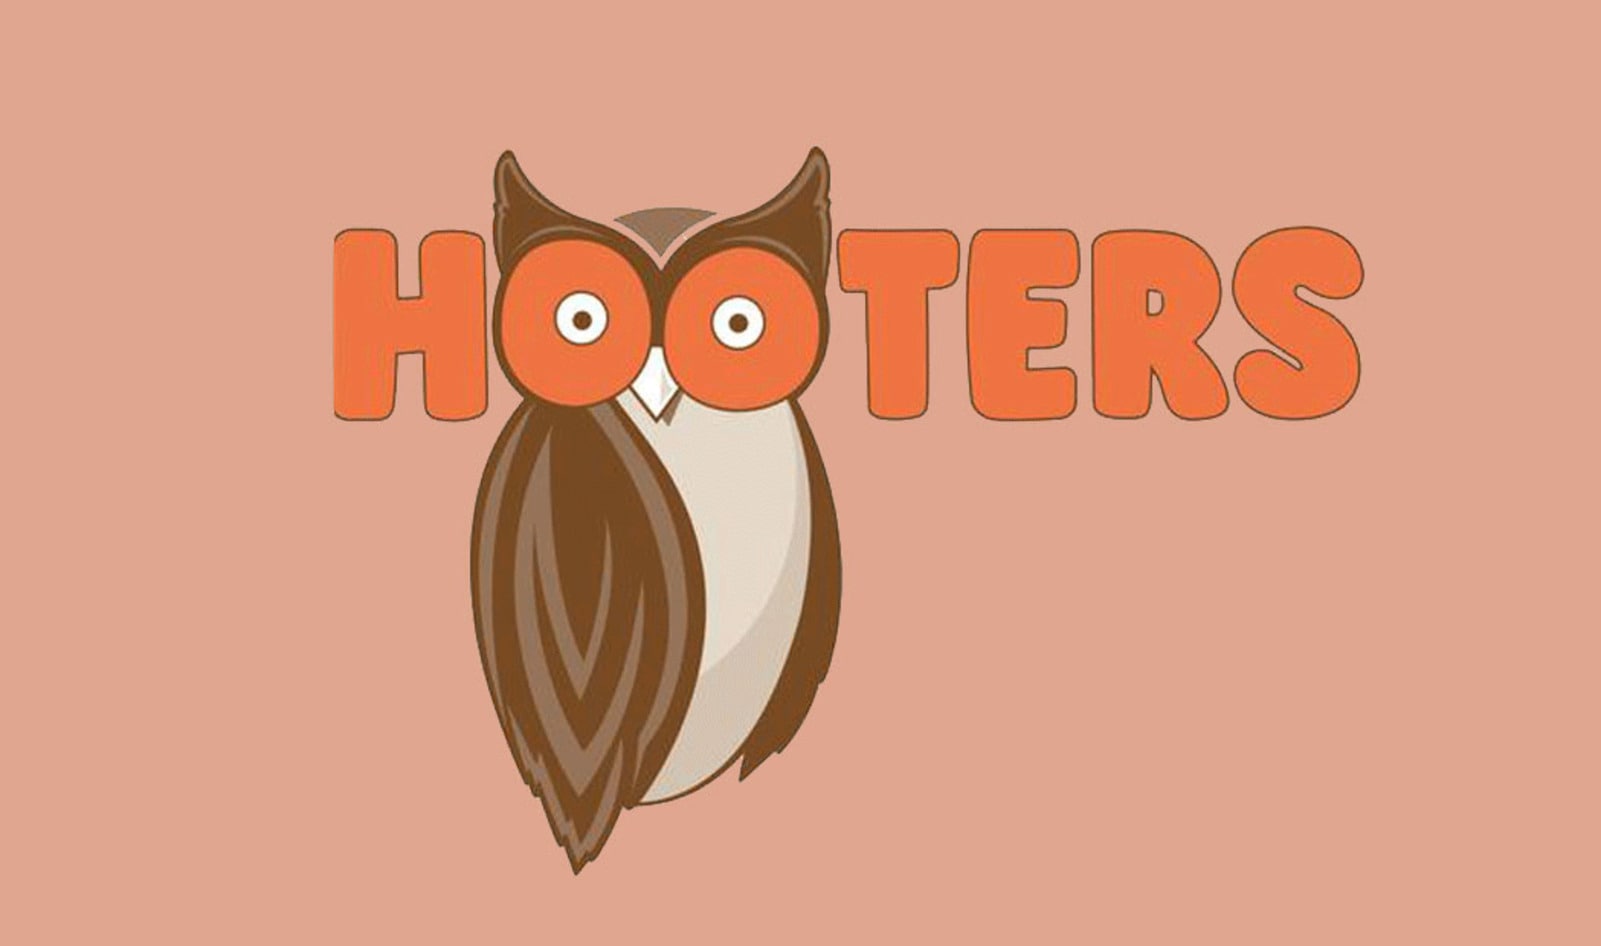 Hooters Parent Brand Partners with Beyond Meat